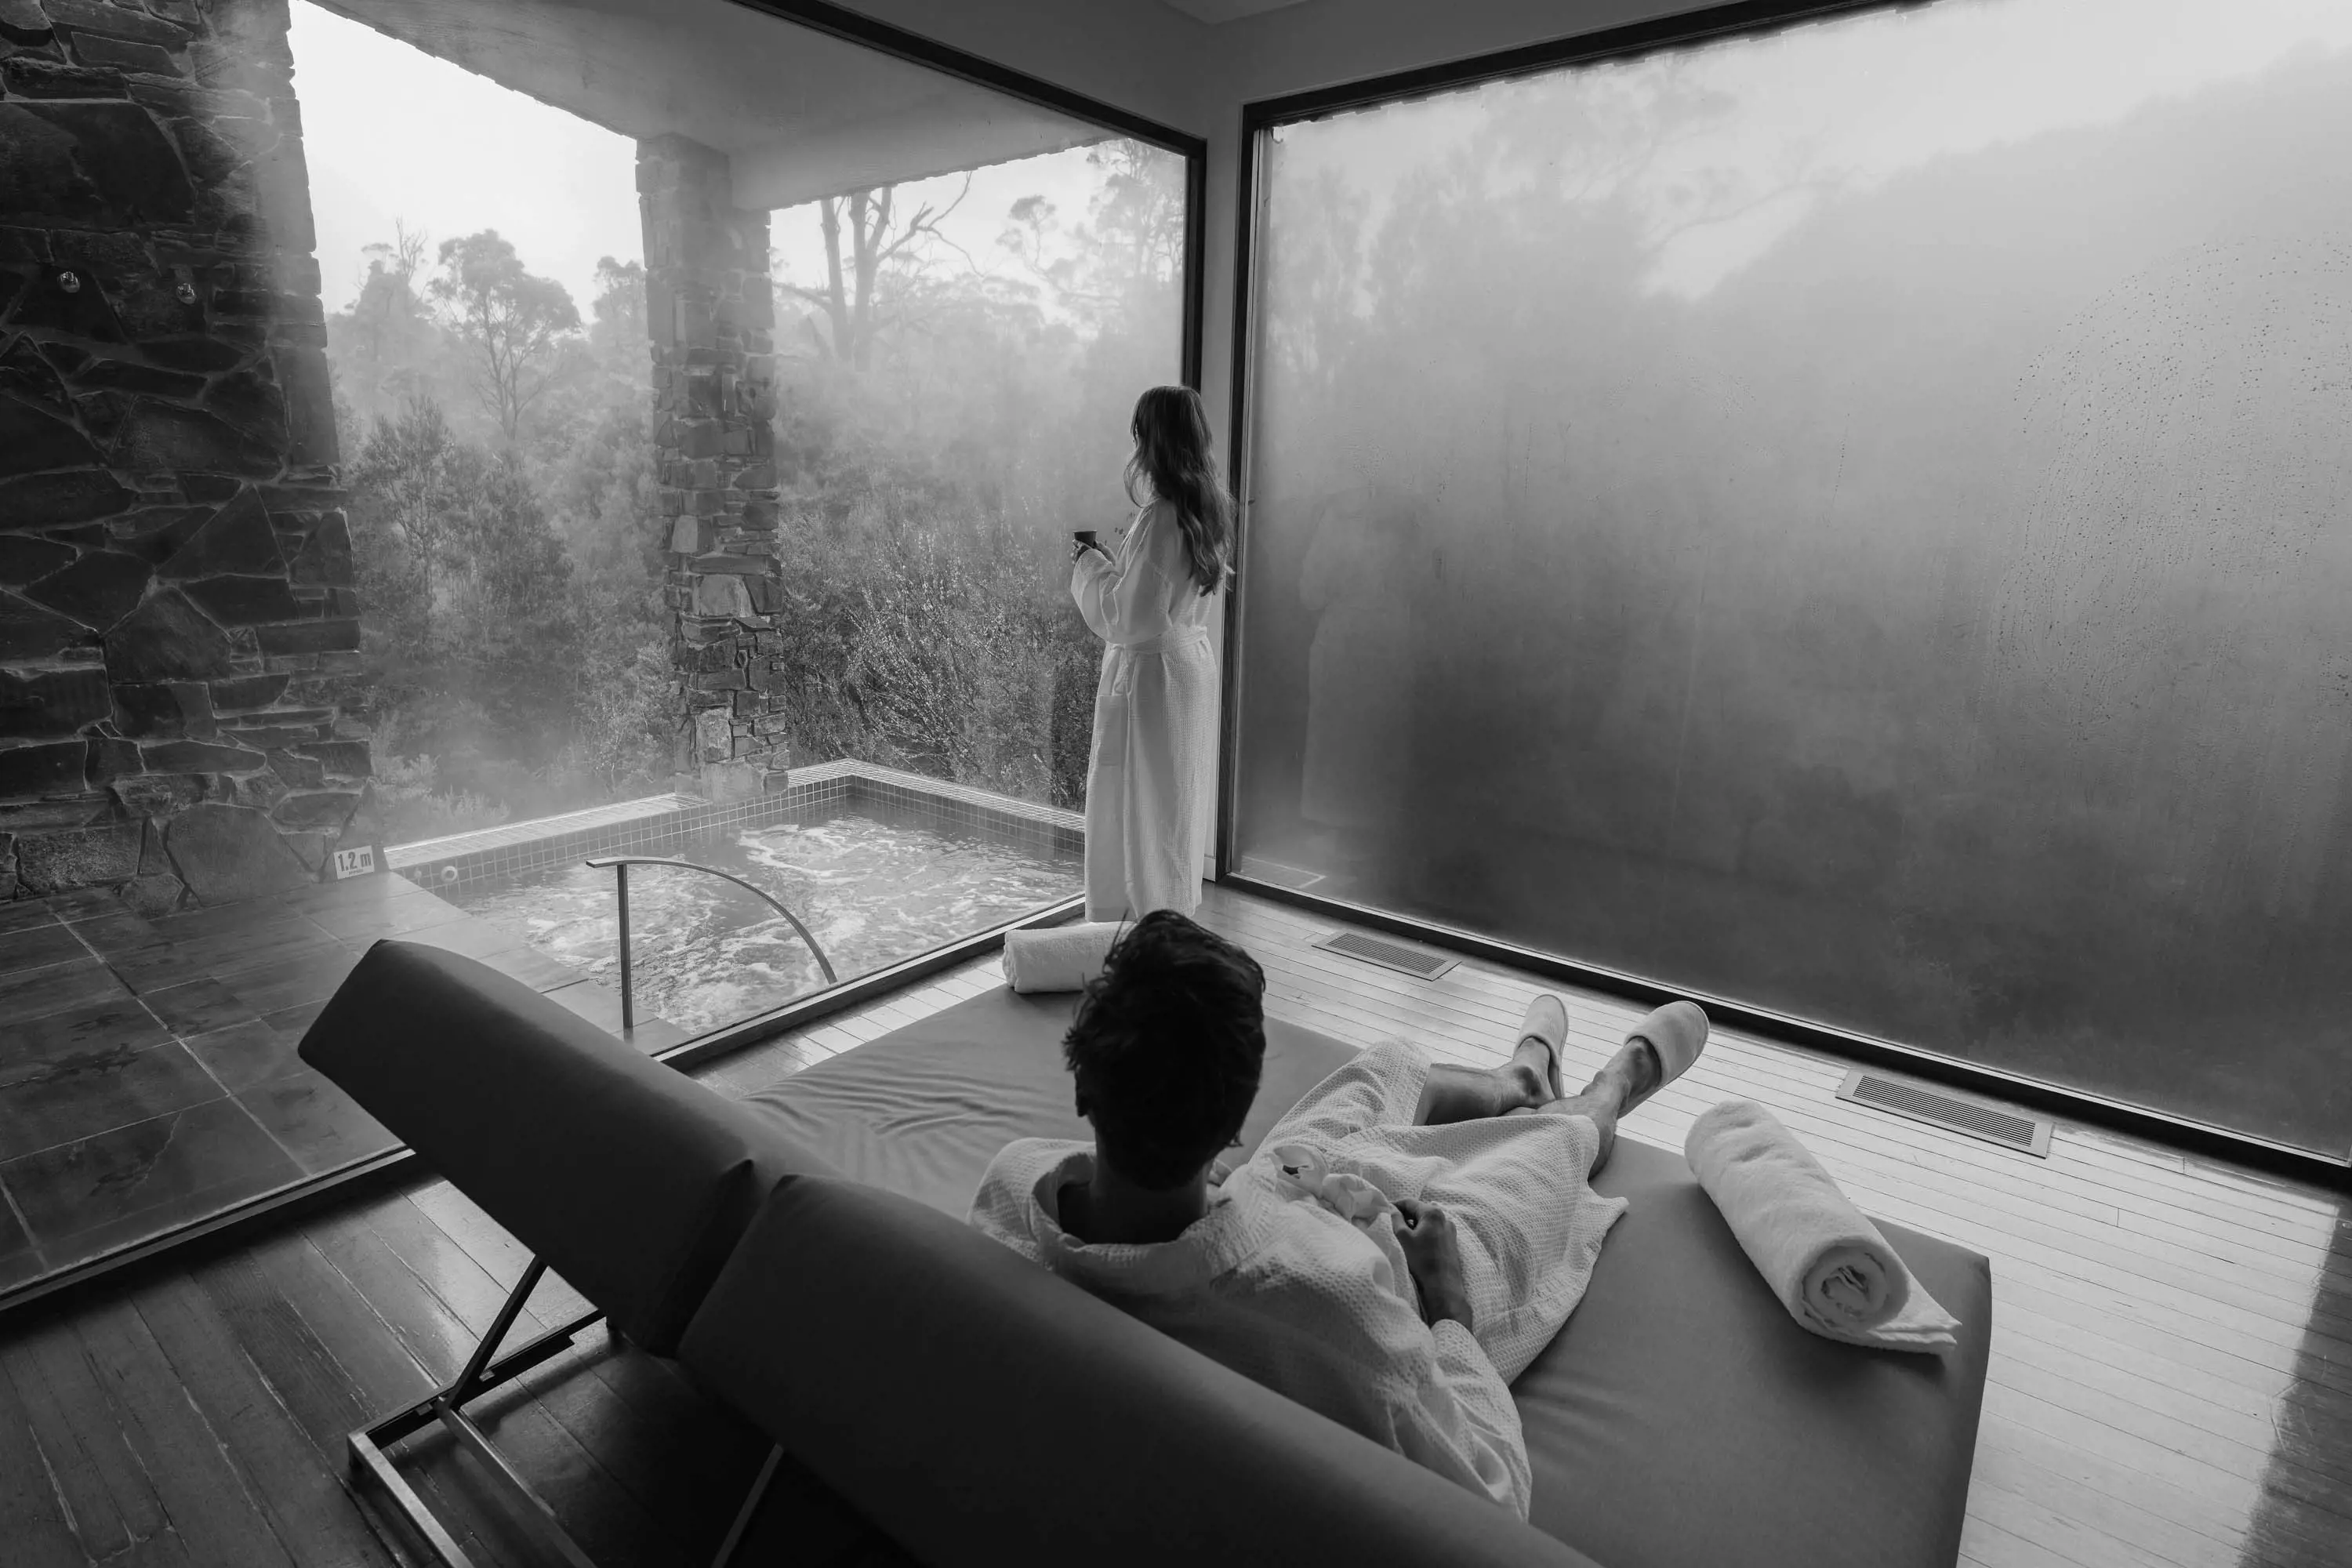 A man wearing a gown made of towelling reclines on a large lounge while a woman wearing a similar gown stands next to a large window looking to an adjacent room with a spa bath and the forest outside.